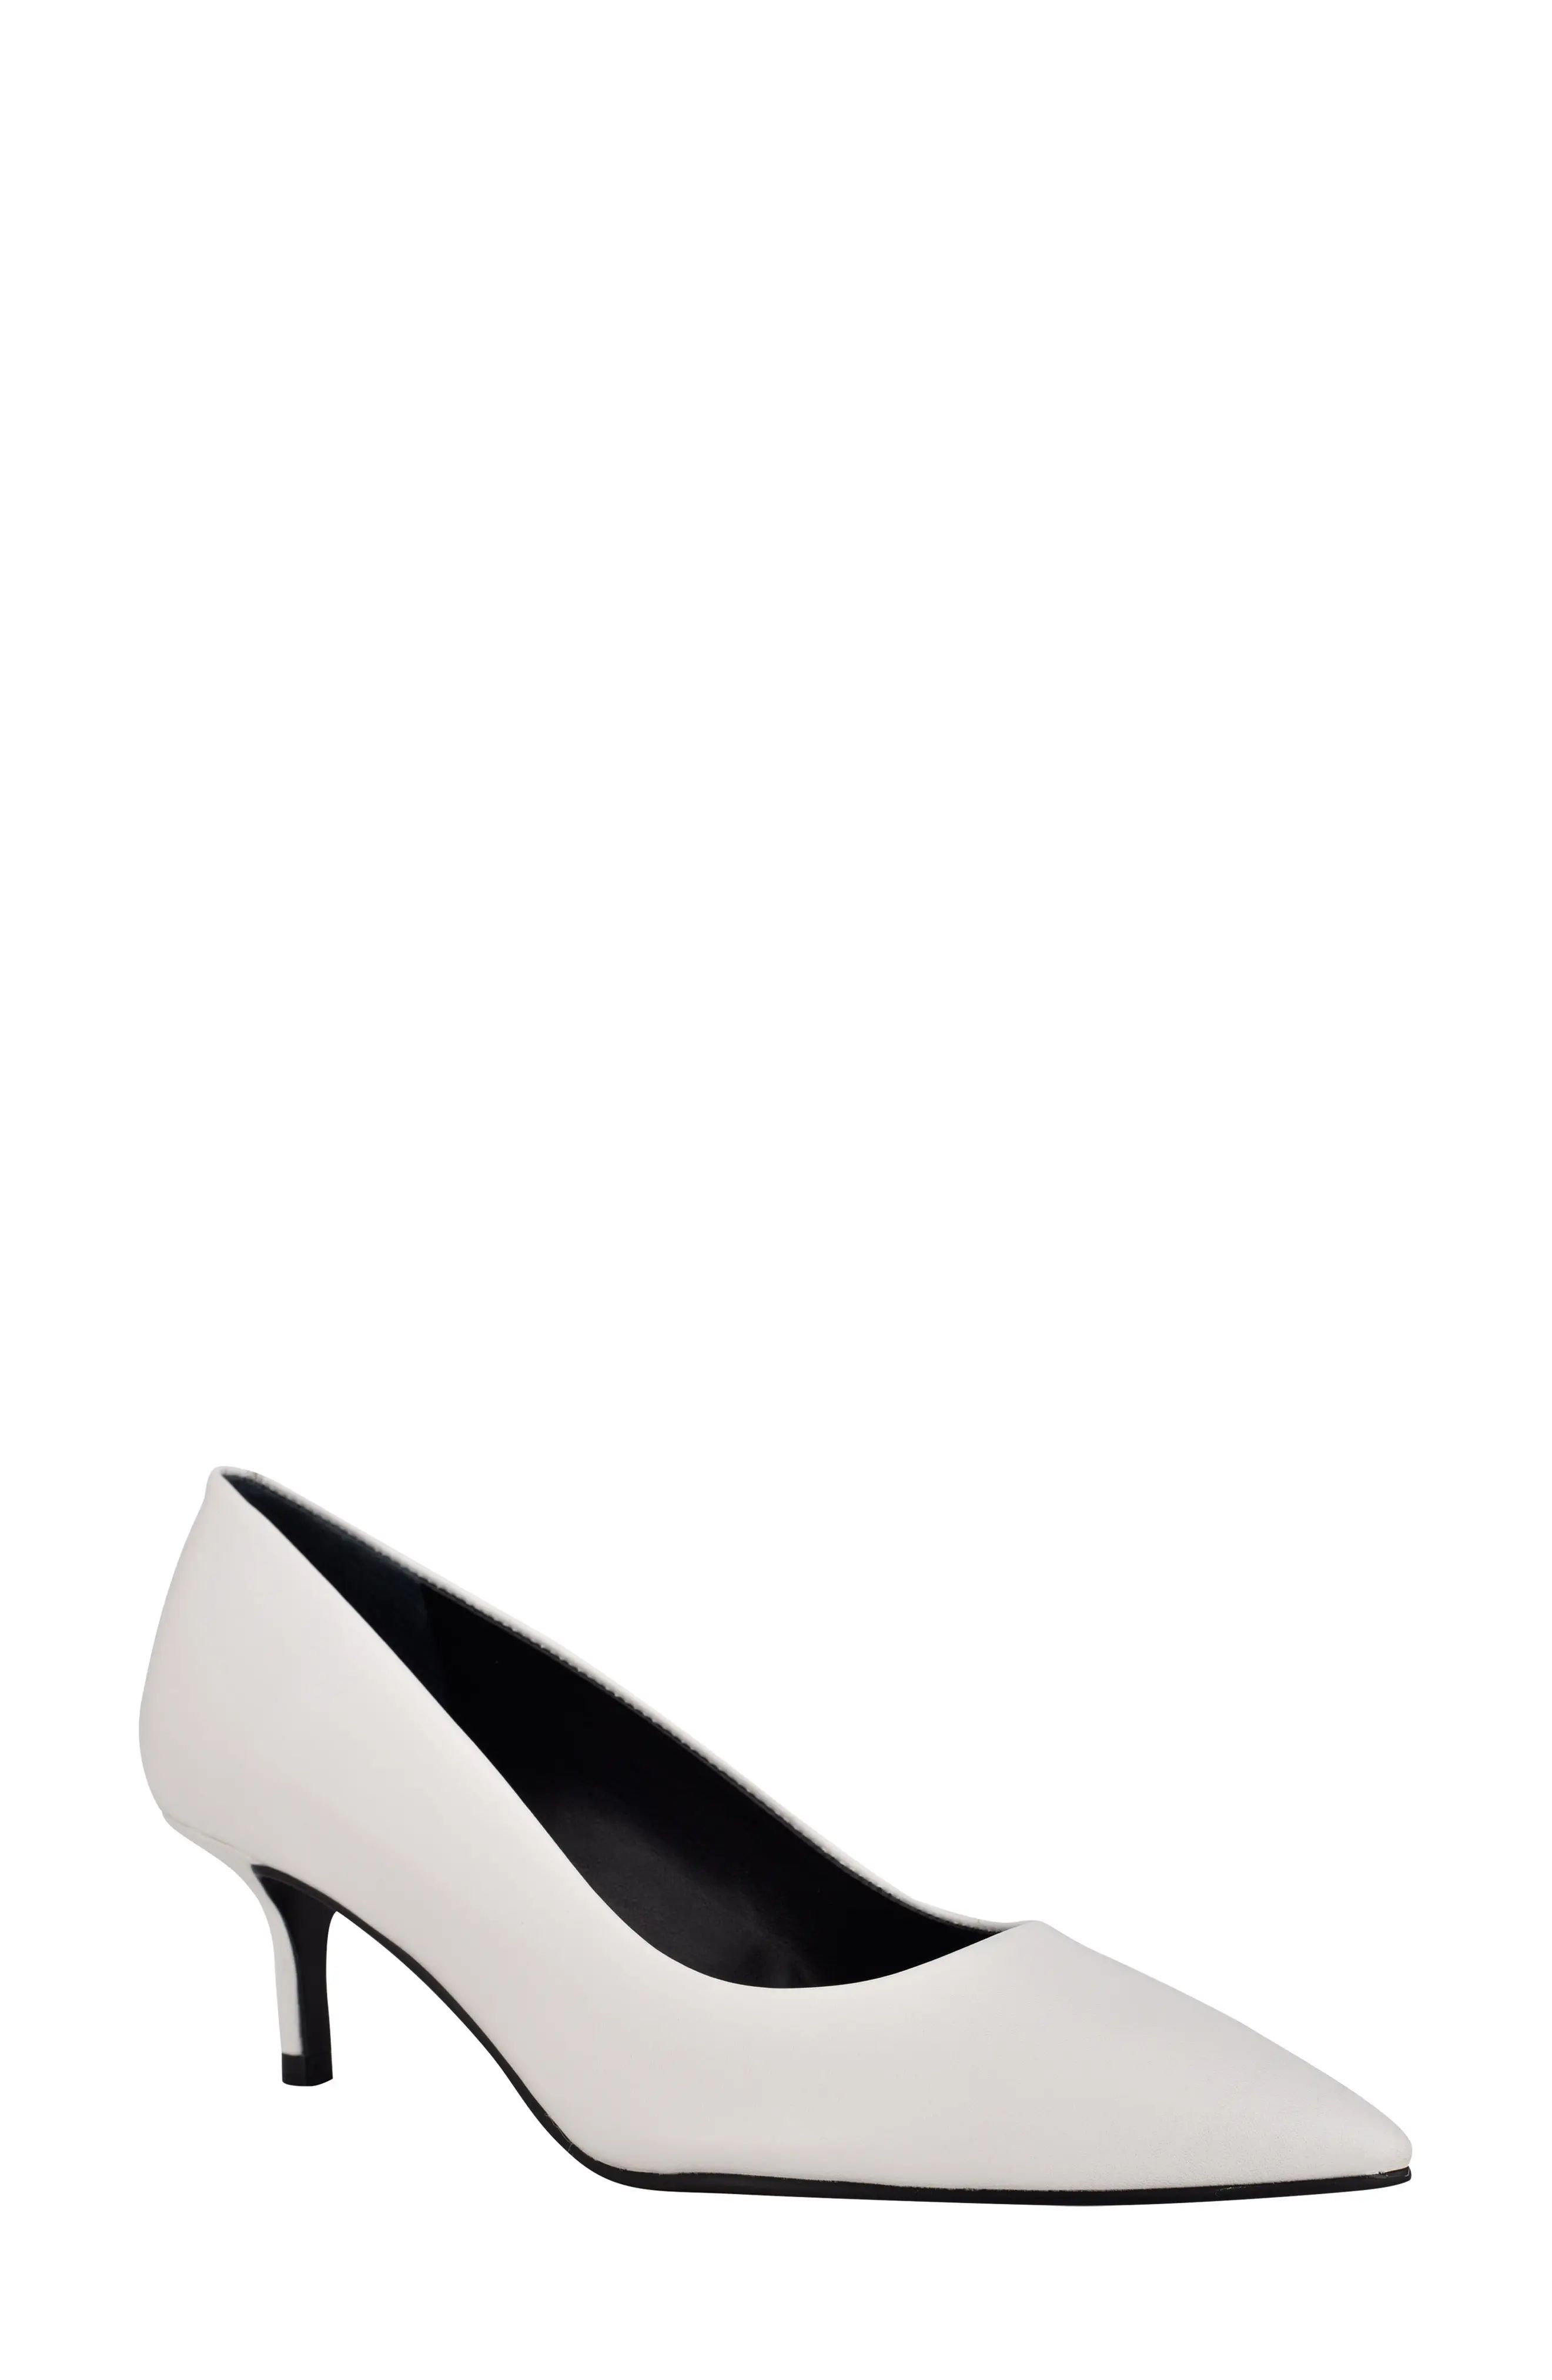 Calvin Klein Danica Pointed Toe Pump, Size 6.5 in White Leather at Nordstrom | Nordstrom